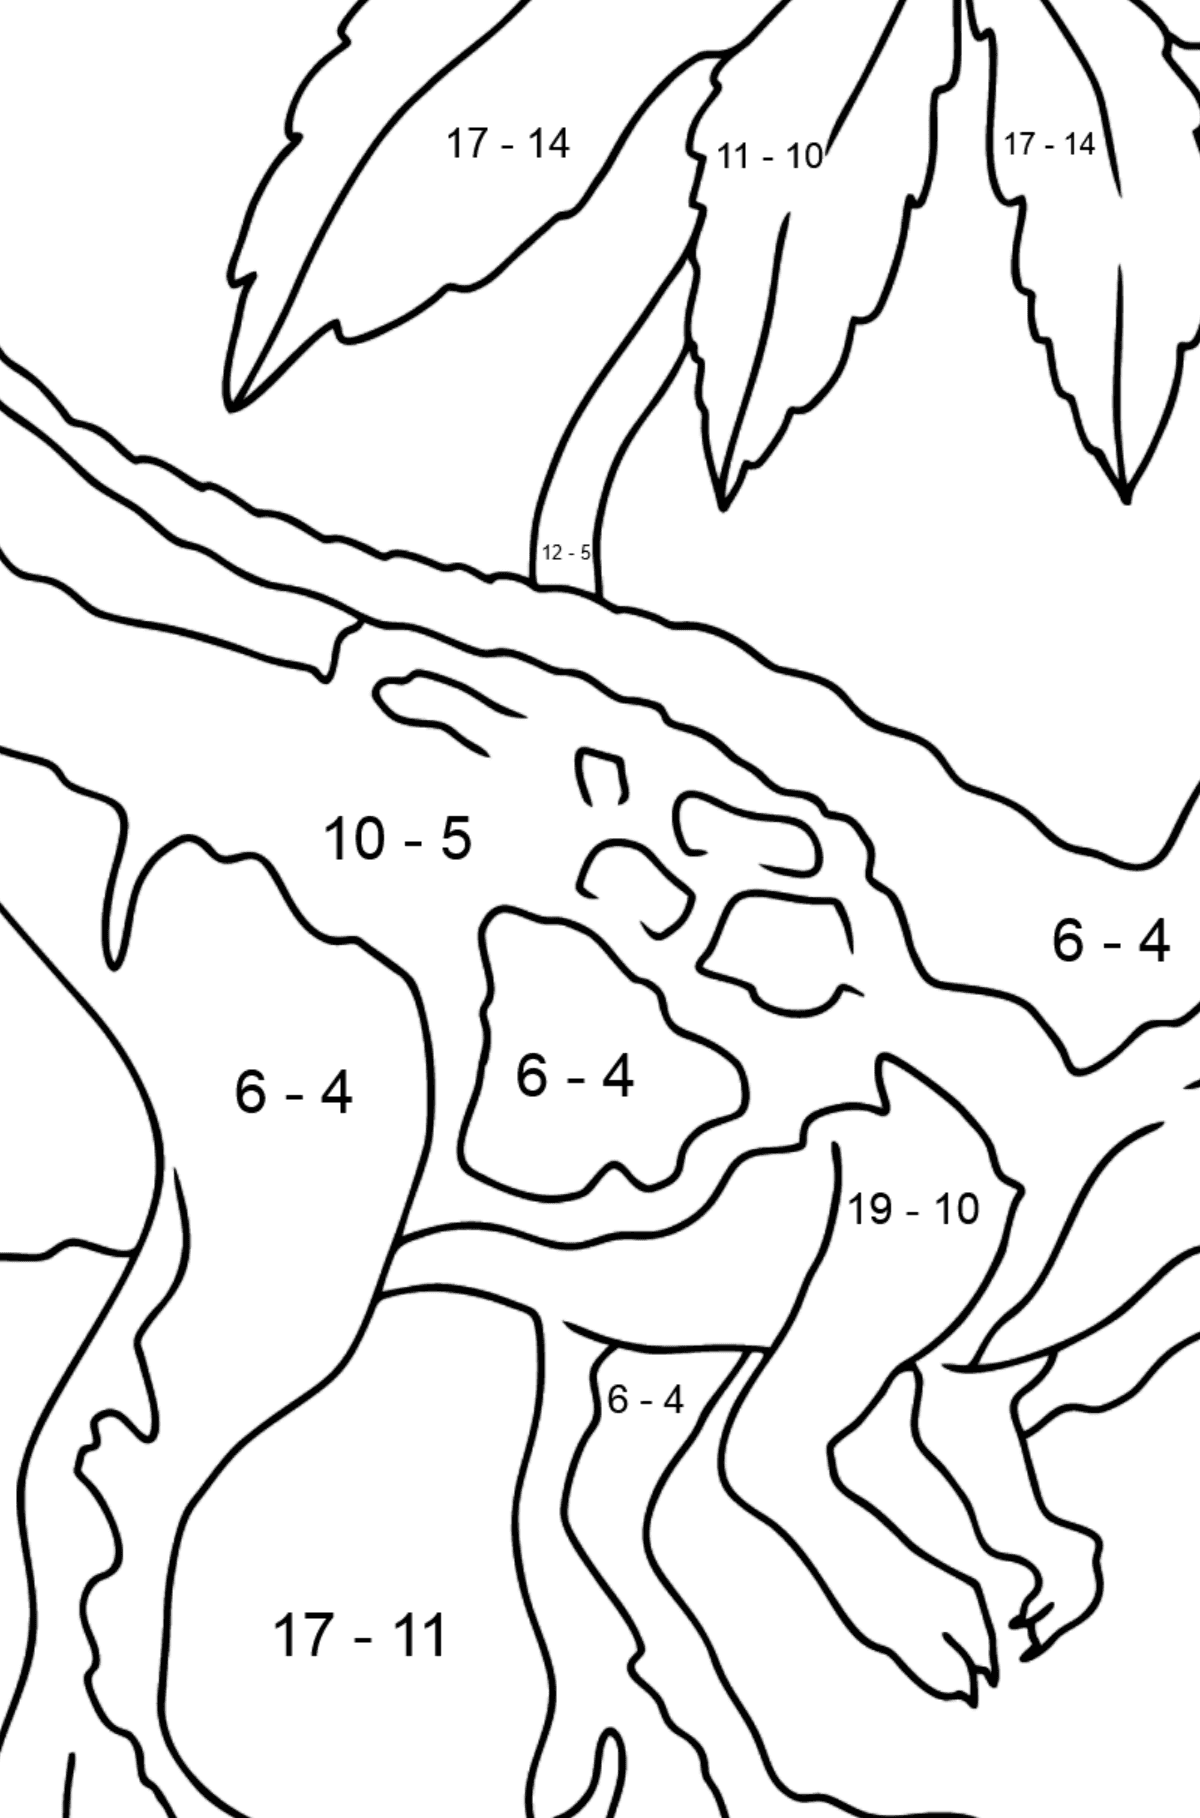 Coloring Page - Tyrannosaurus - A Terrestrial Predator - Math Coloring - Subtraction for Kids